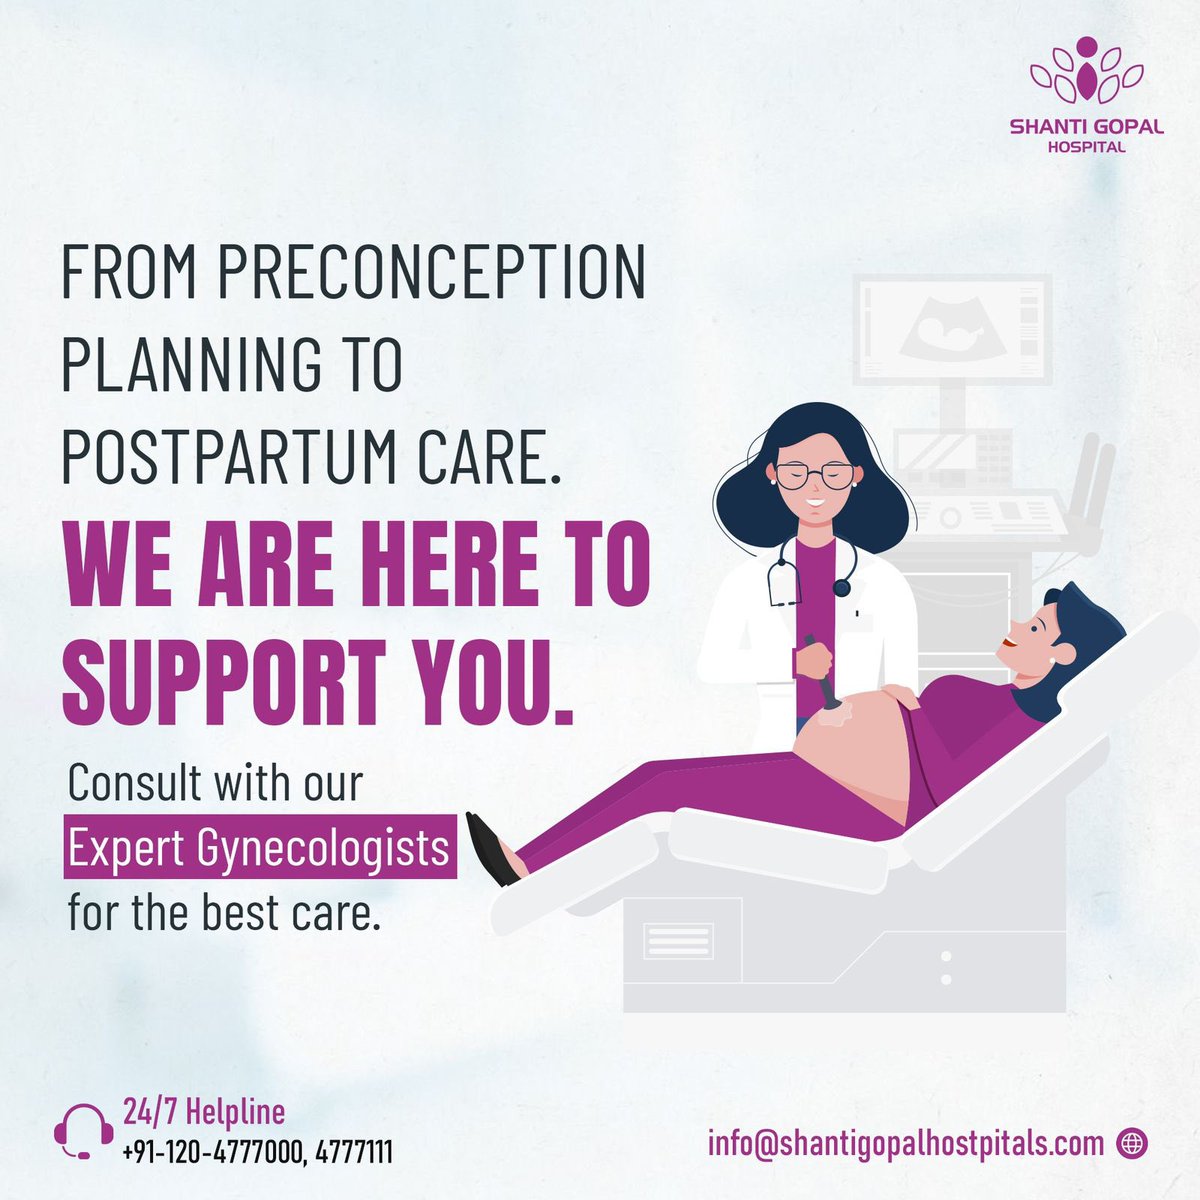 Embarking on the journey from preconception planning to postpartum care is a significant milestone, and we're here to support you every step of the way.
.
.
.
.
.
.
.
.
.
#shantigopalhospital #hospitals #hospital #hospitalservices #hospitalsncr #servicehospital #healthcare